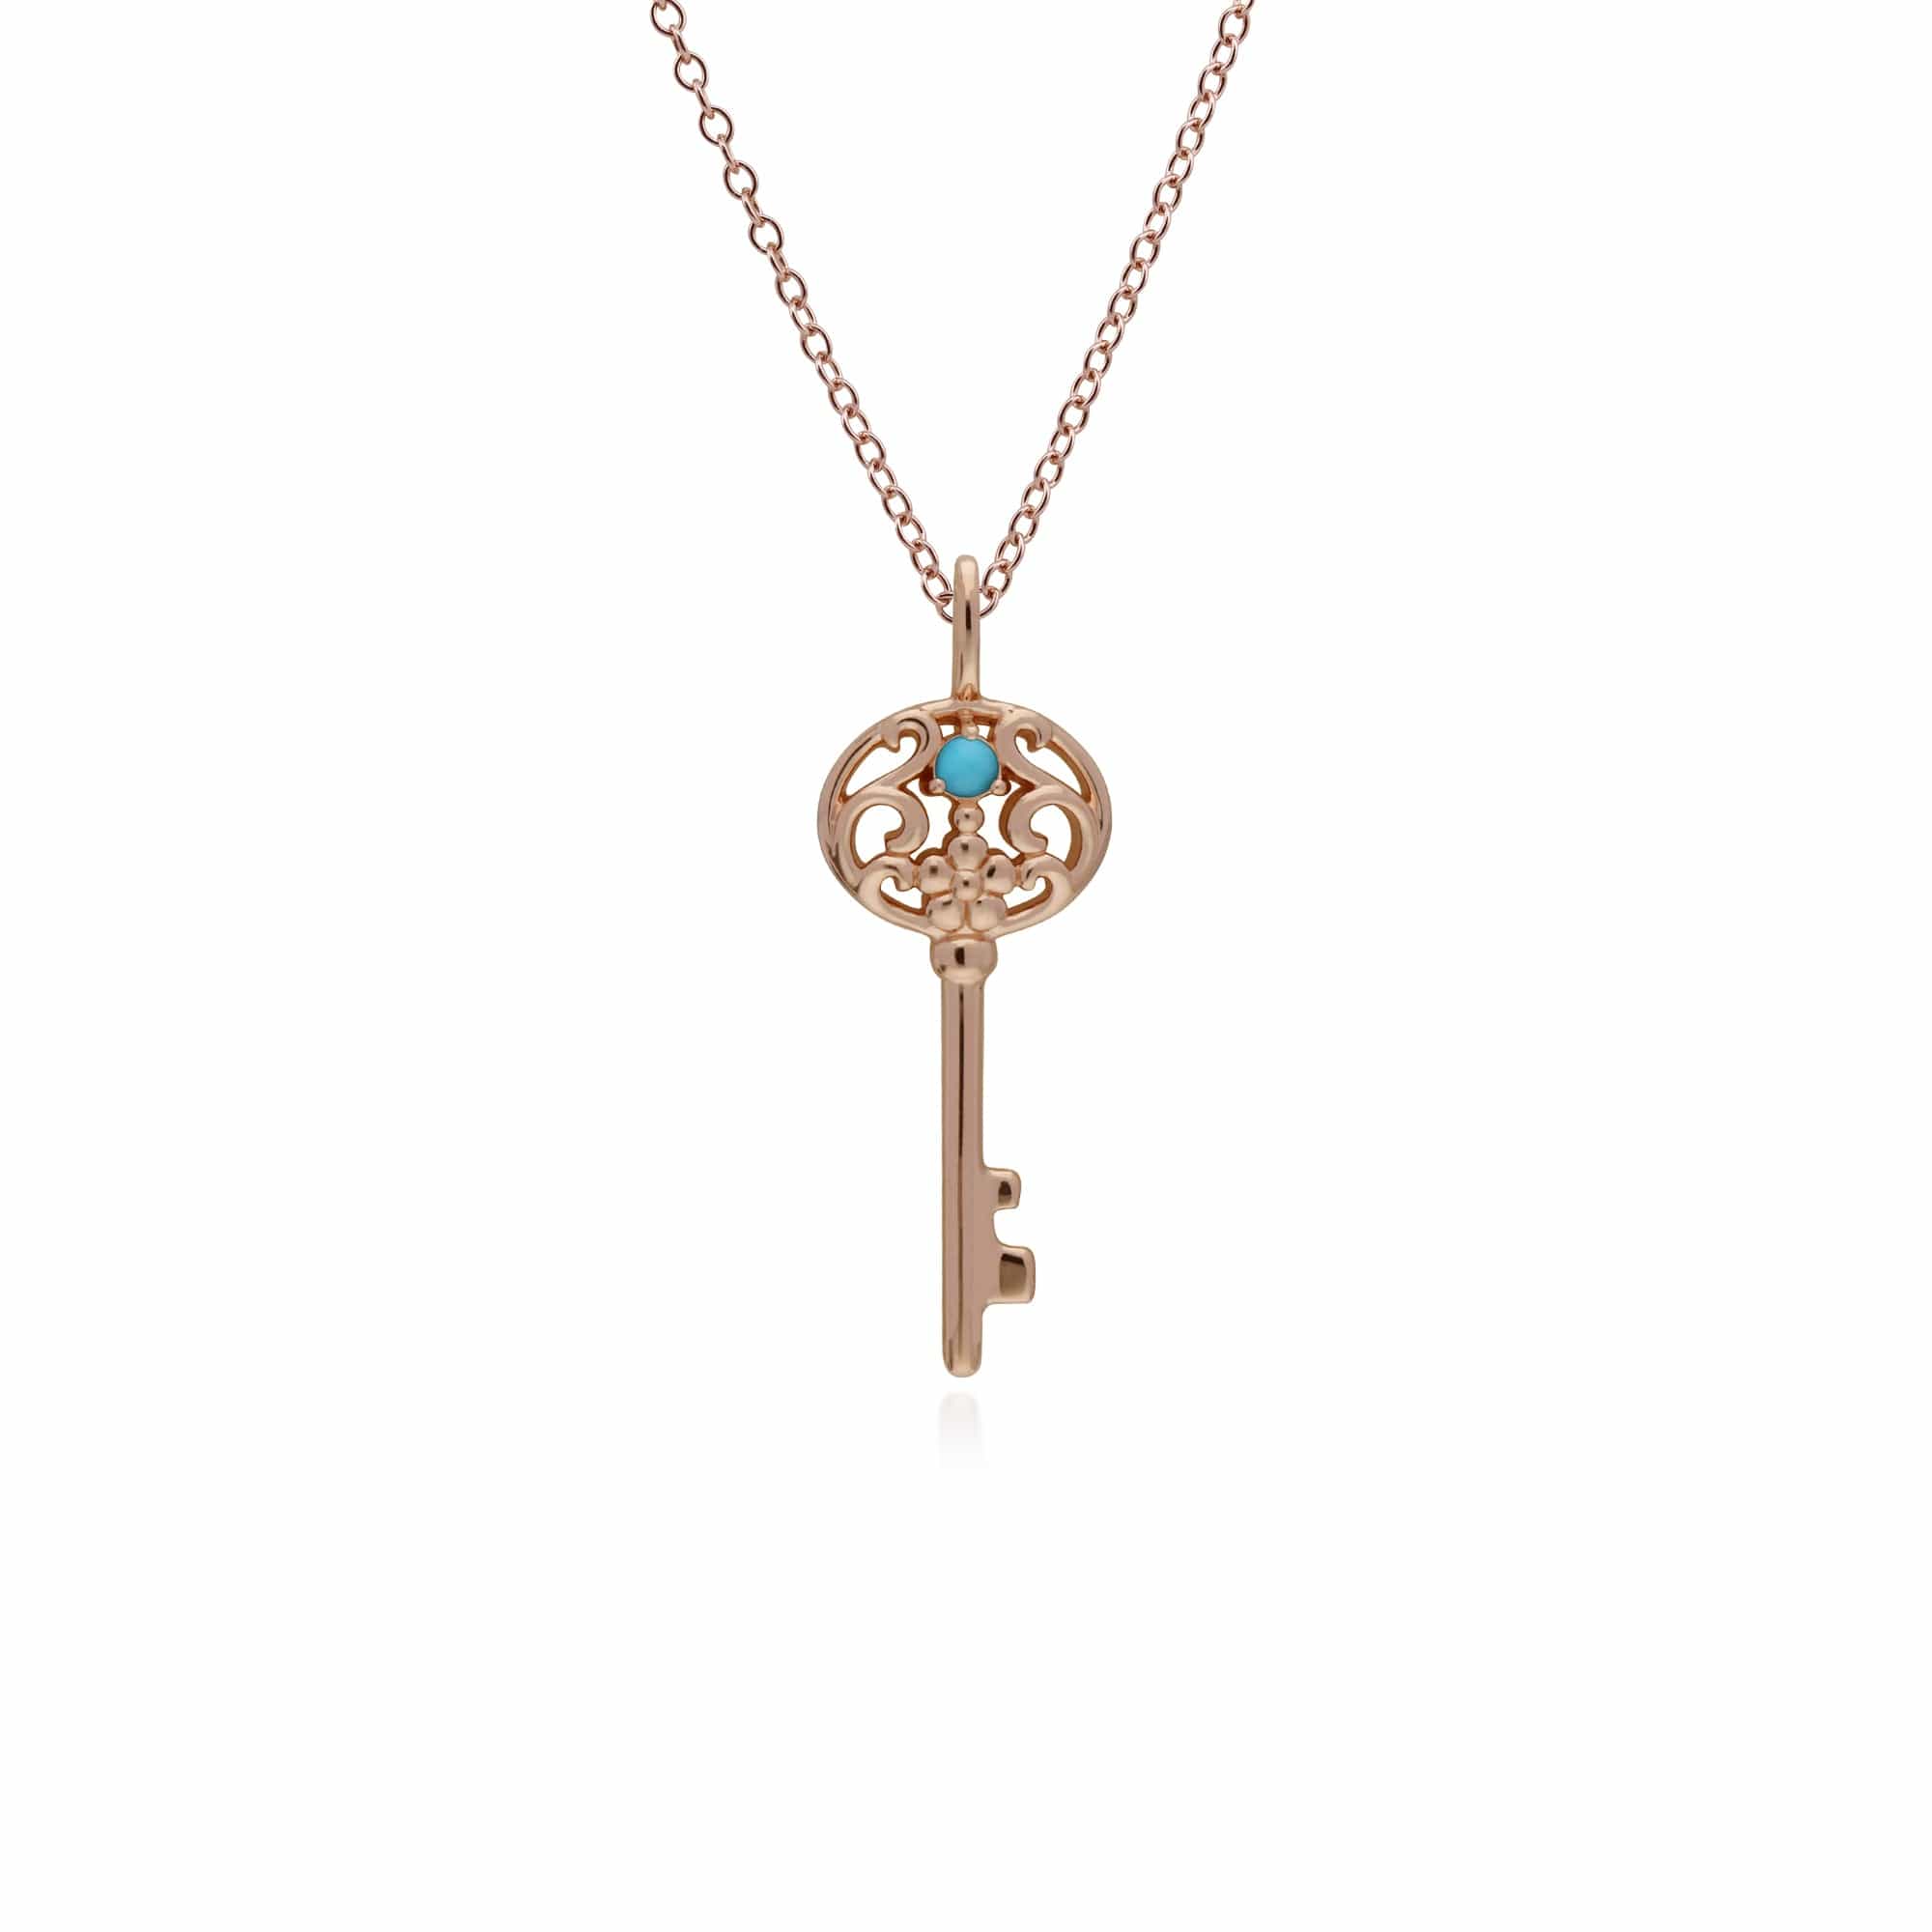 270P026714925-270P026901925 Classic Heart Lock Pendant & Turquoise Big Key Charm in Rose Gold Plated 925 Sterling Silver 2